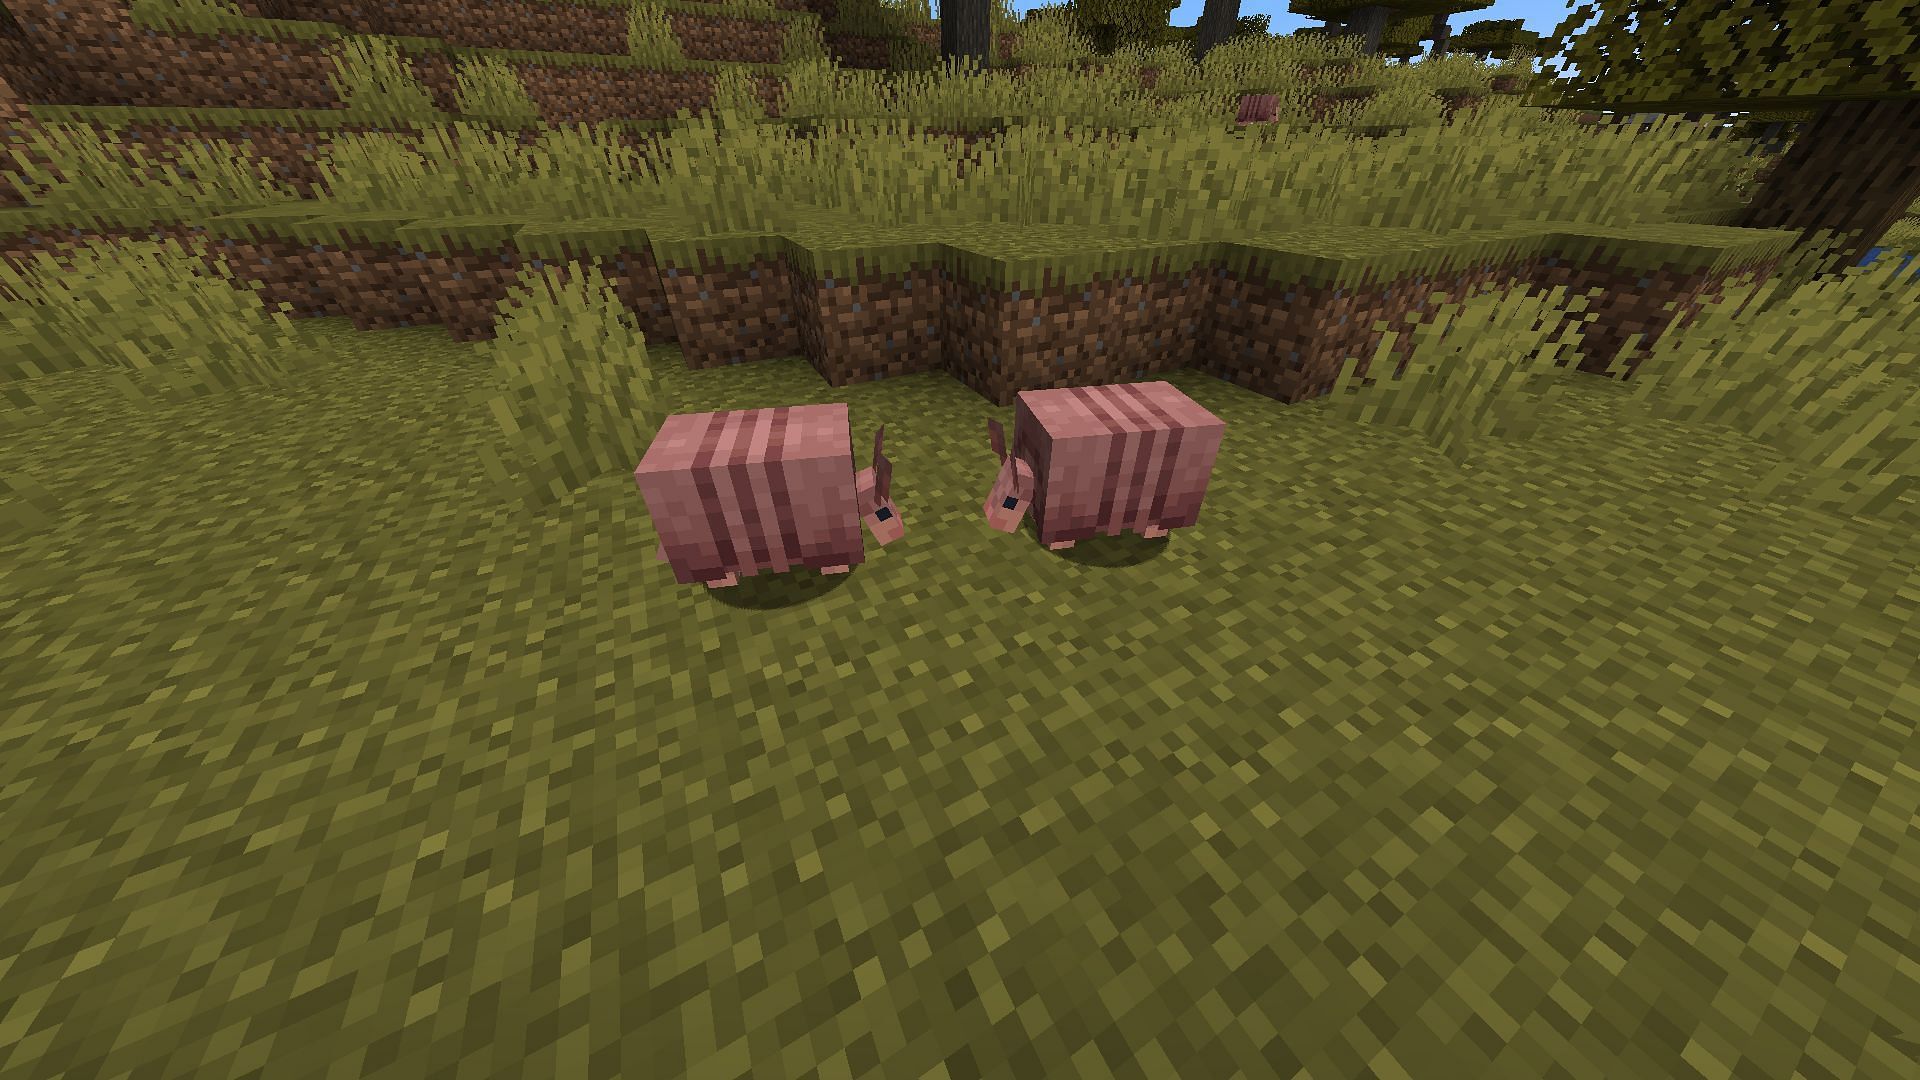 At least two armadillos are needed for breeding in Minecraft (Image via Mojang Studios)